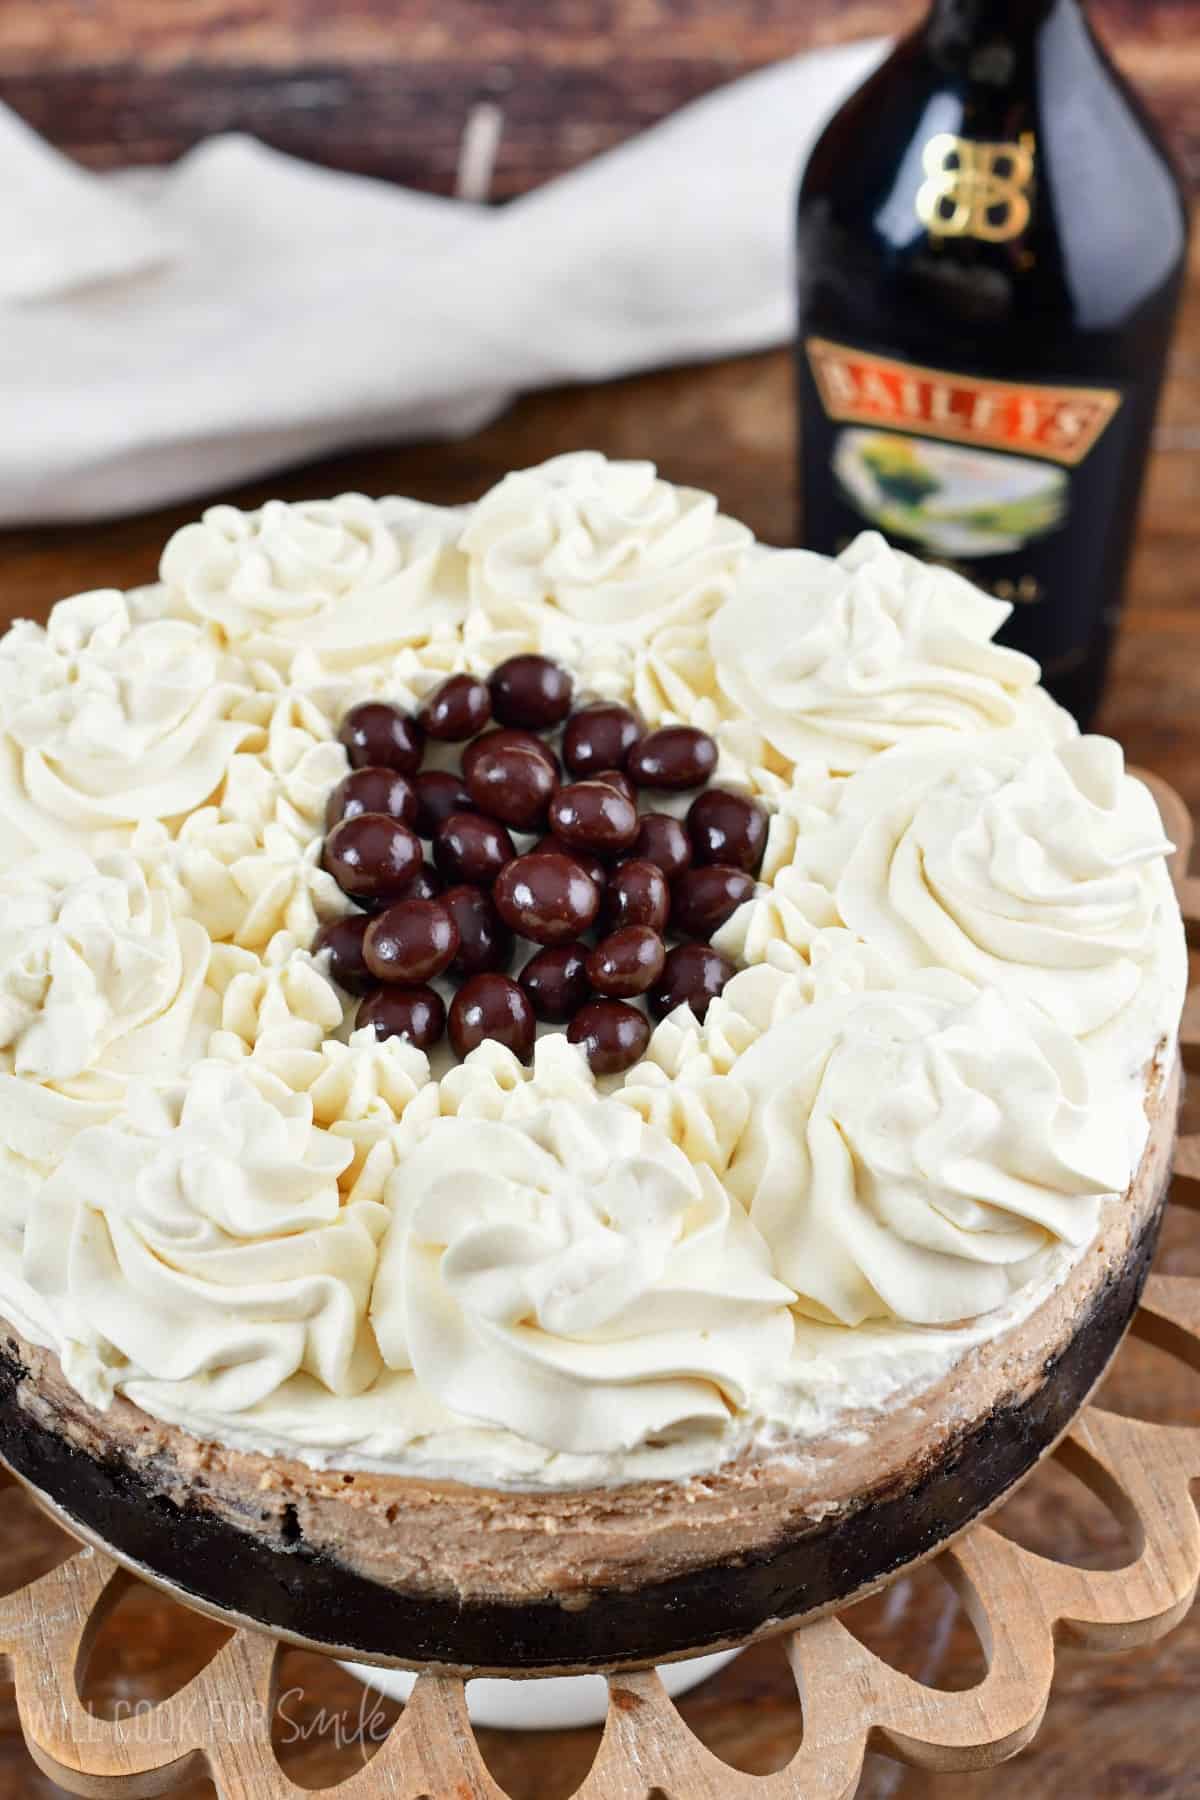 Whole Bailey's cheesecake topped with Bailey's whipped cream and chocolate beans.